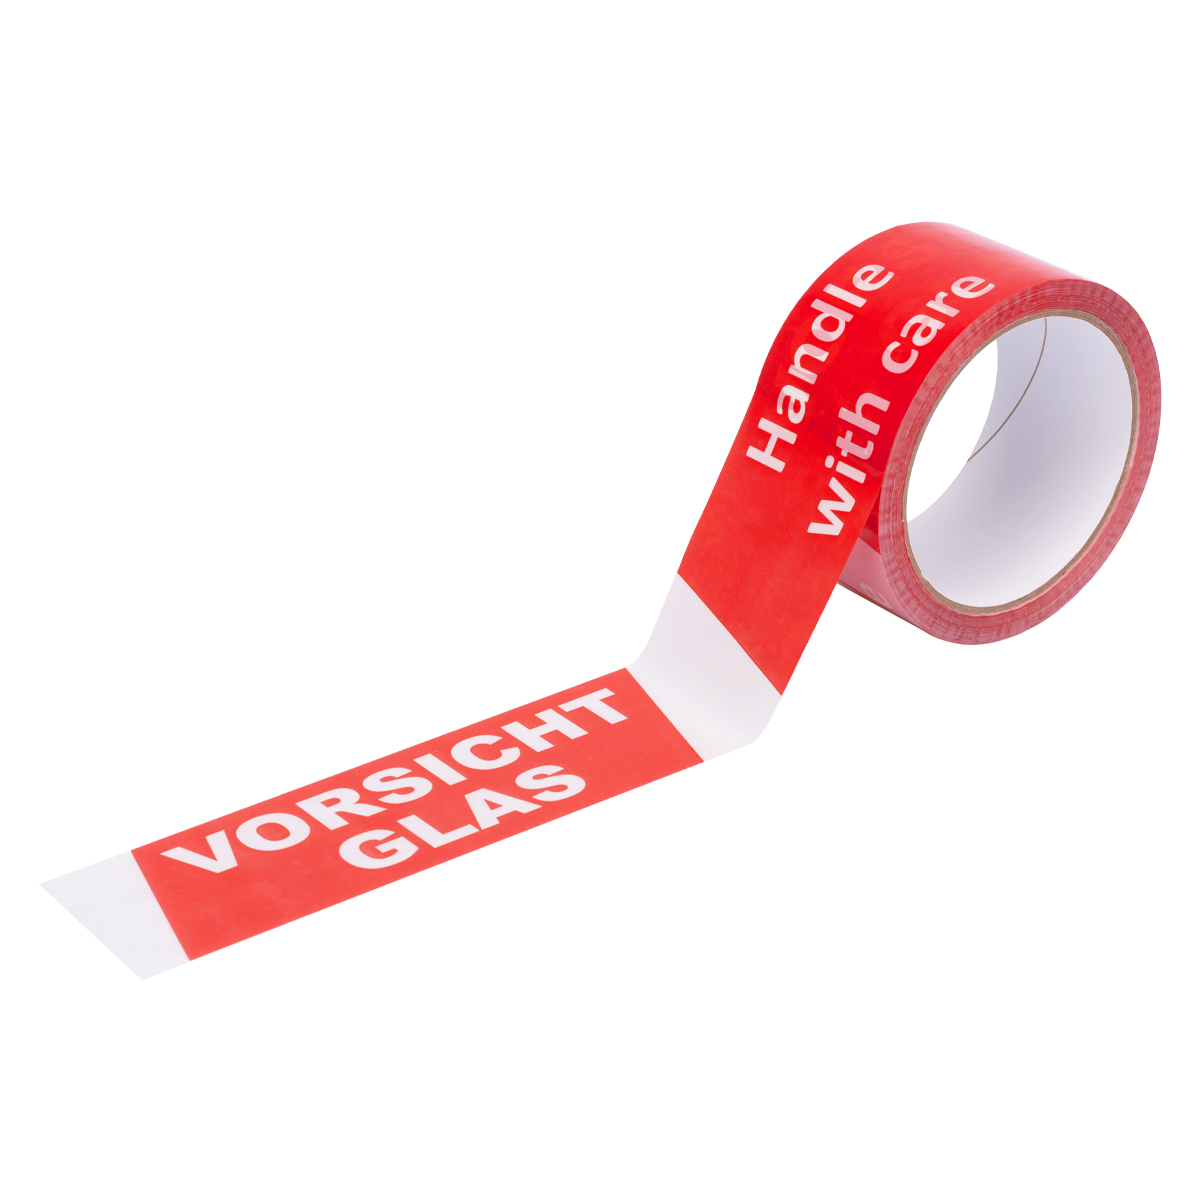 PP Adhesive tape with misc. warning imprints, 66m, low Noise